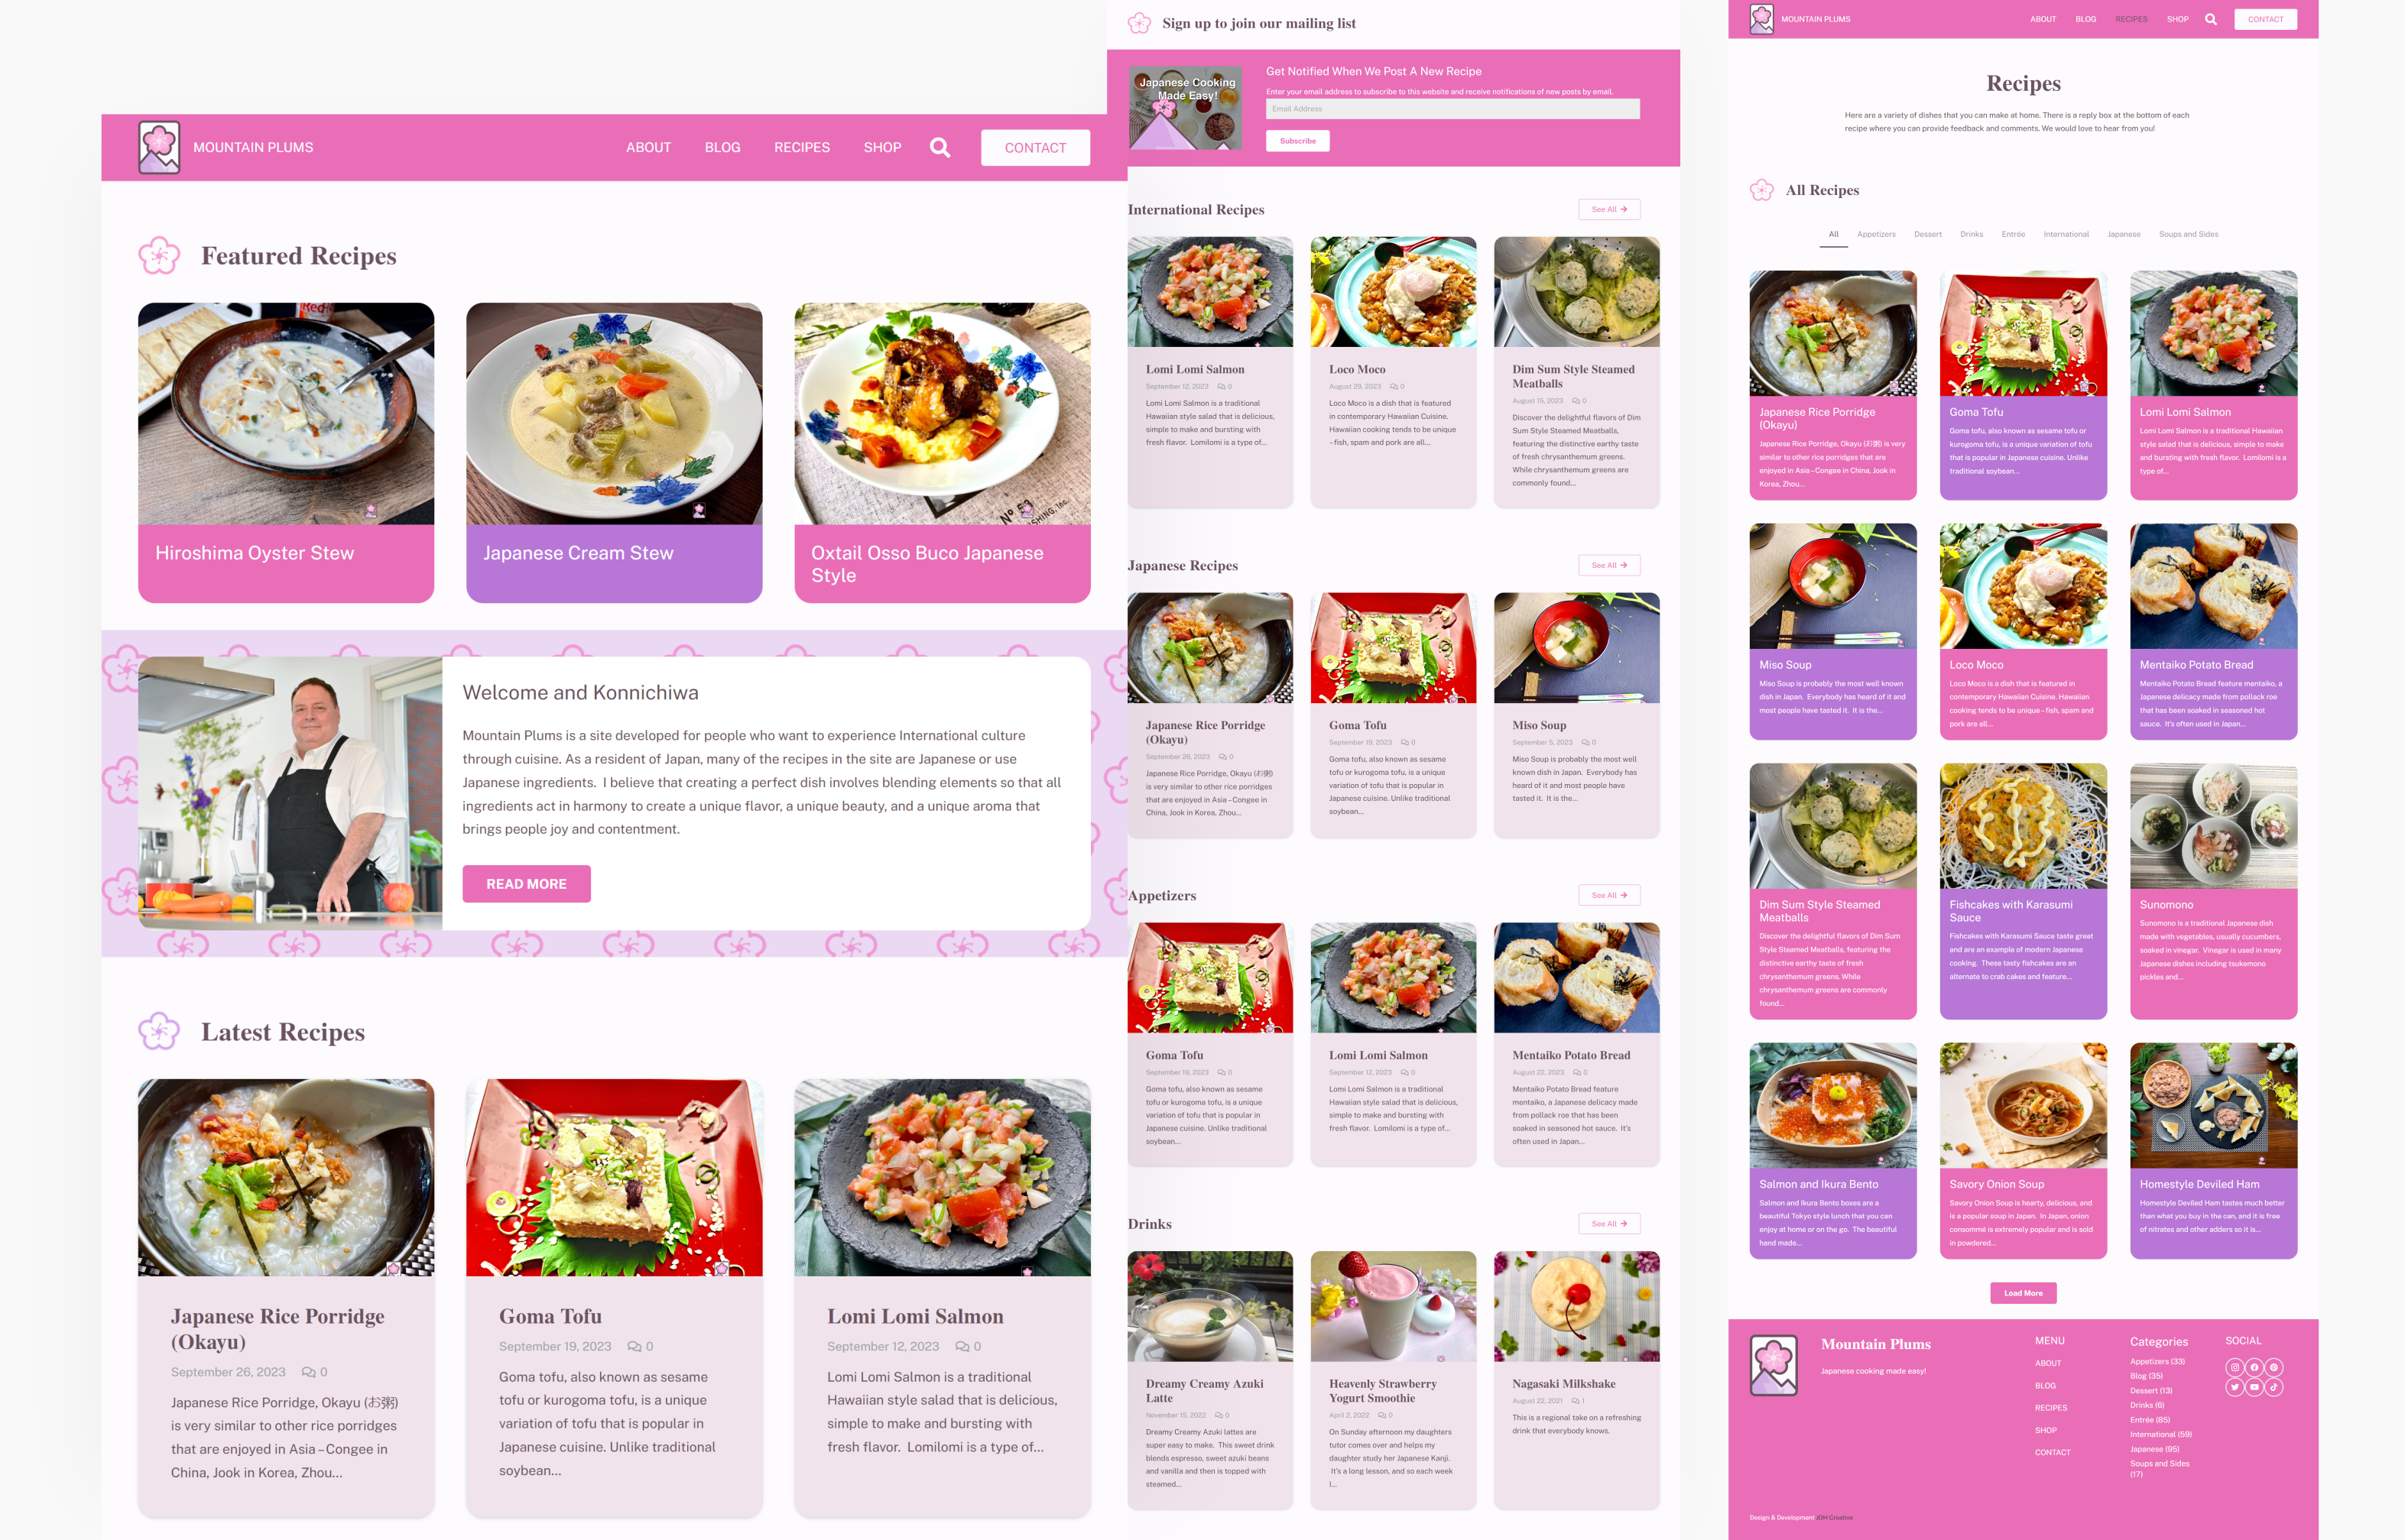 Web design for Mountain Plums. Designed by Johnery